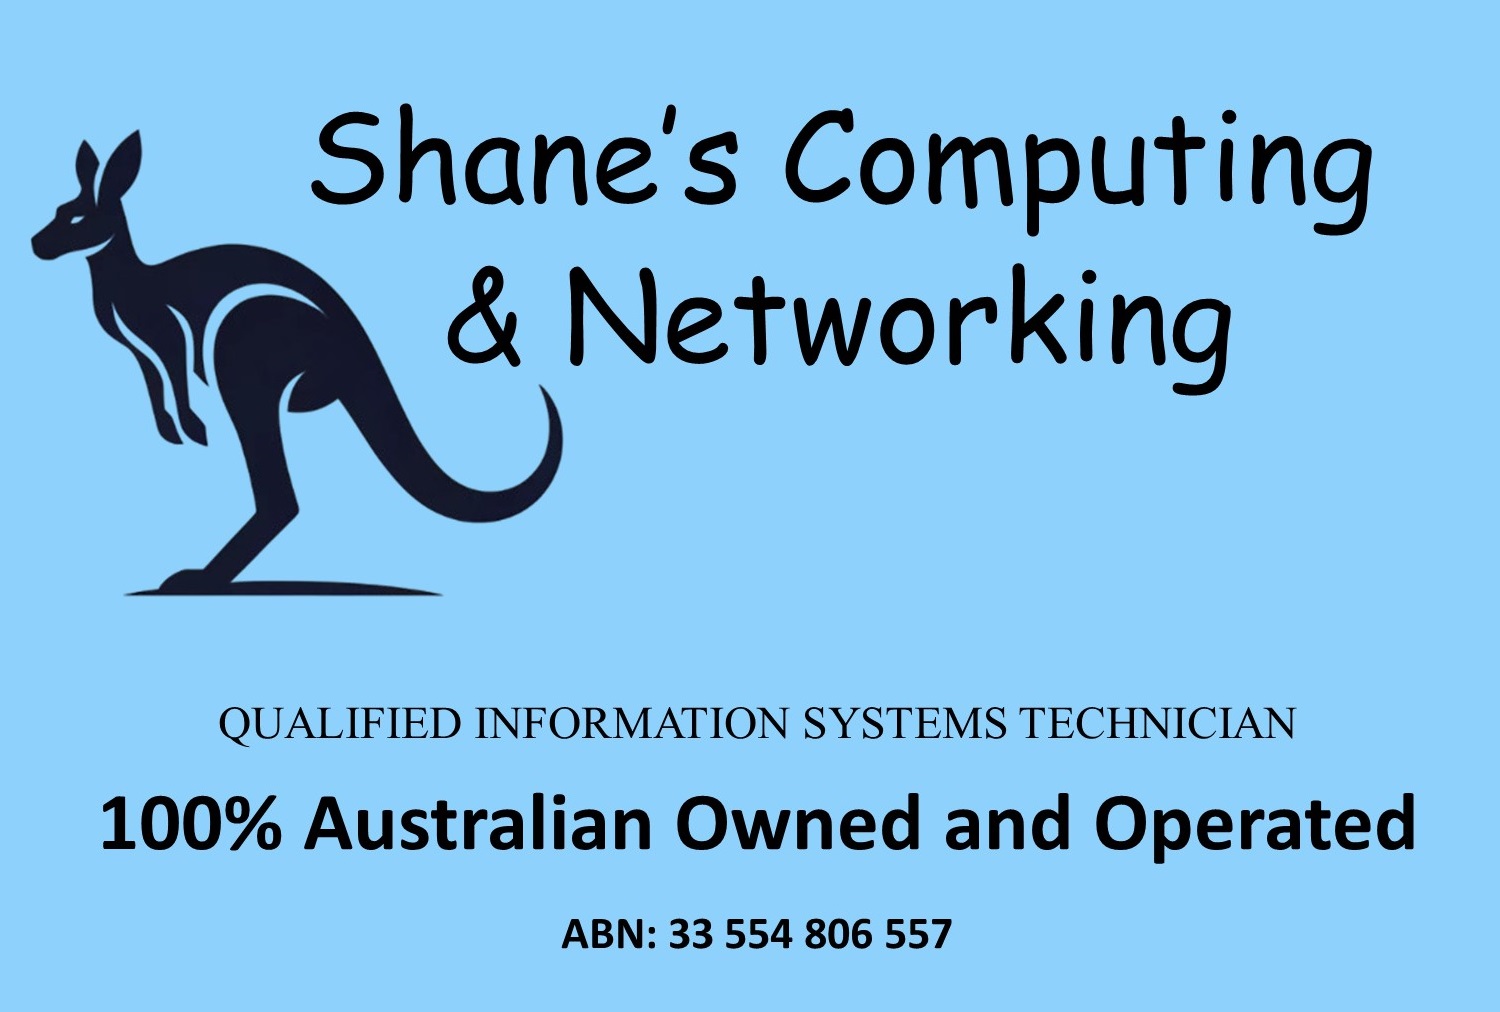  Shanes Computing & Networking, Information Systems Technician , 100% Aussie Owned, Operated & Qualified